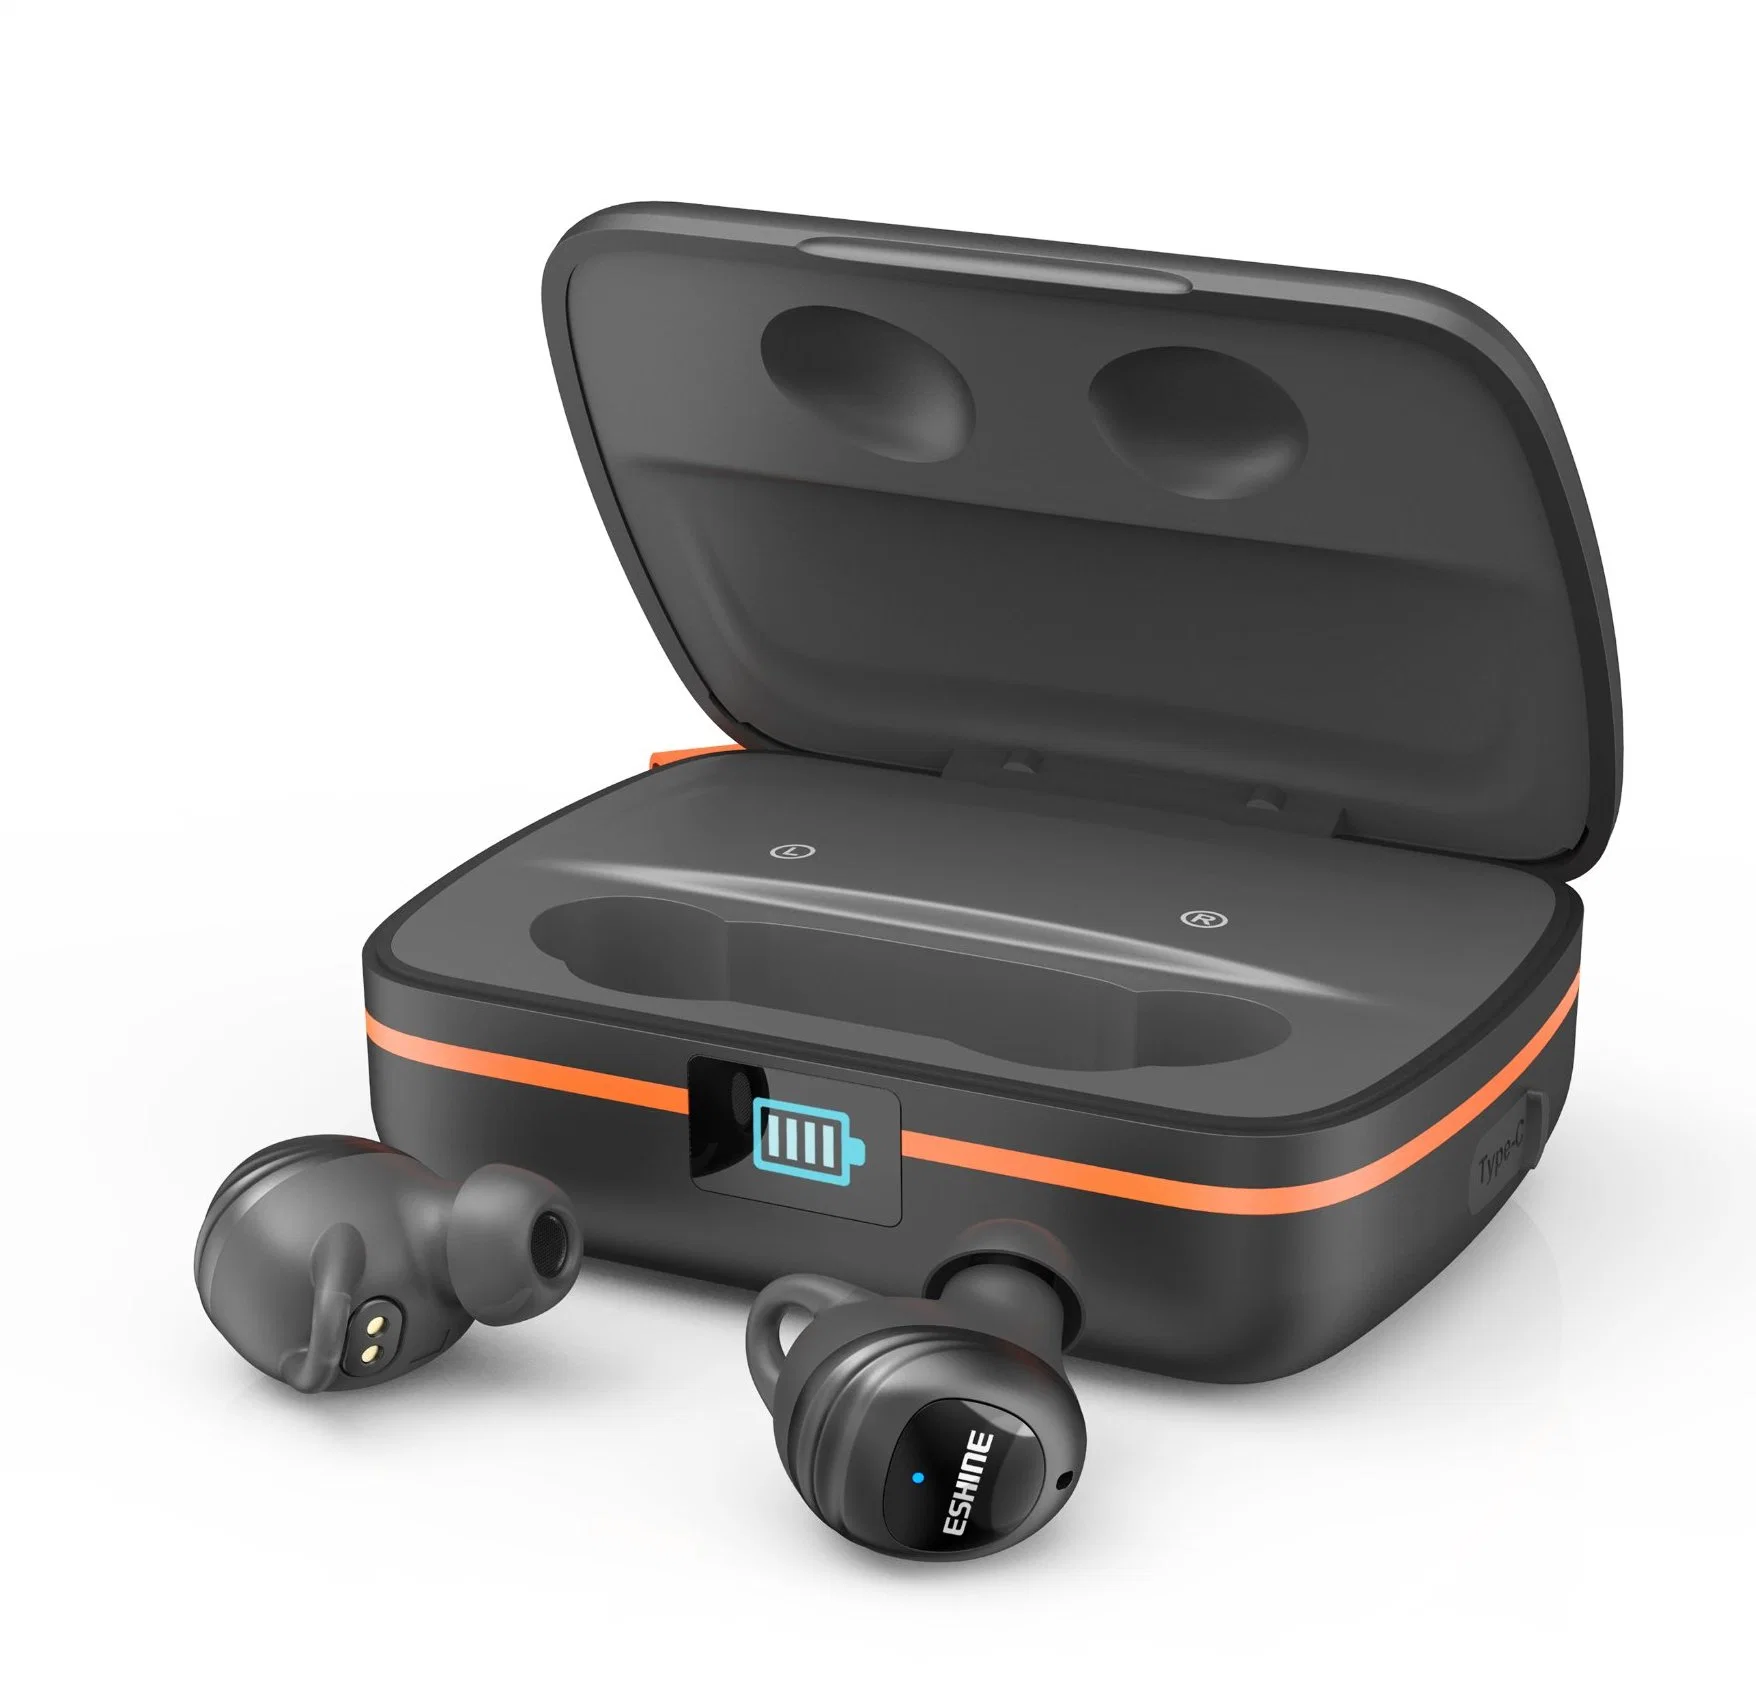 Supplier of Wireless Earbuds, Tws Bluetooth 5.0 Headphone, Ipx6 Waterproof, with Solar Charging Case for Sport, Work